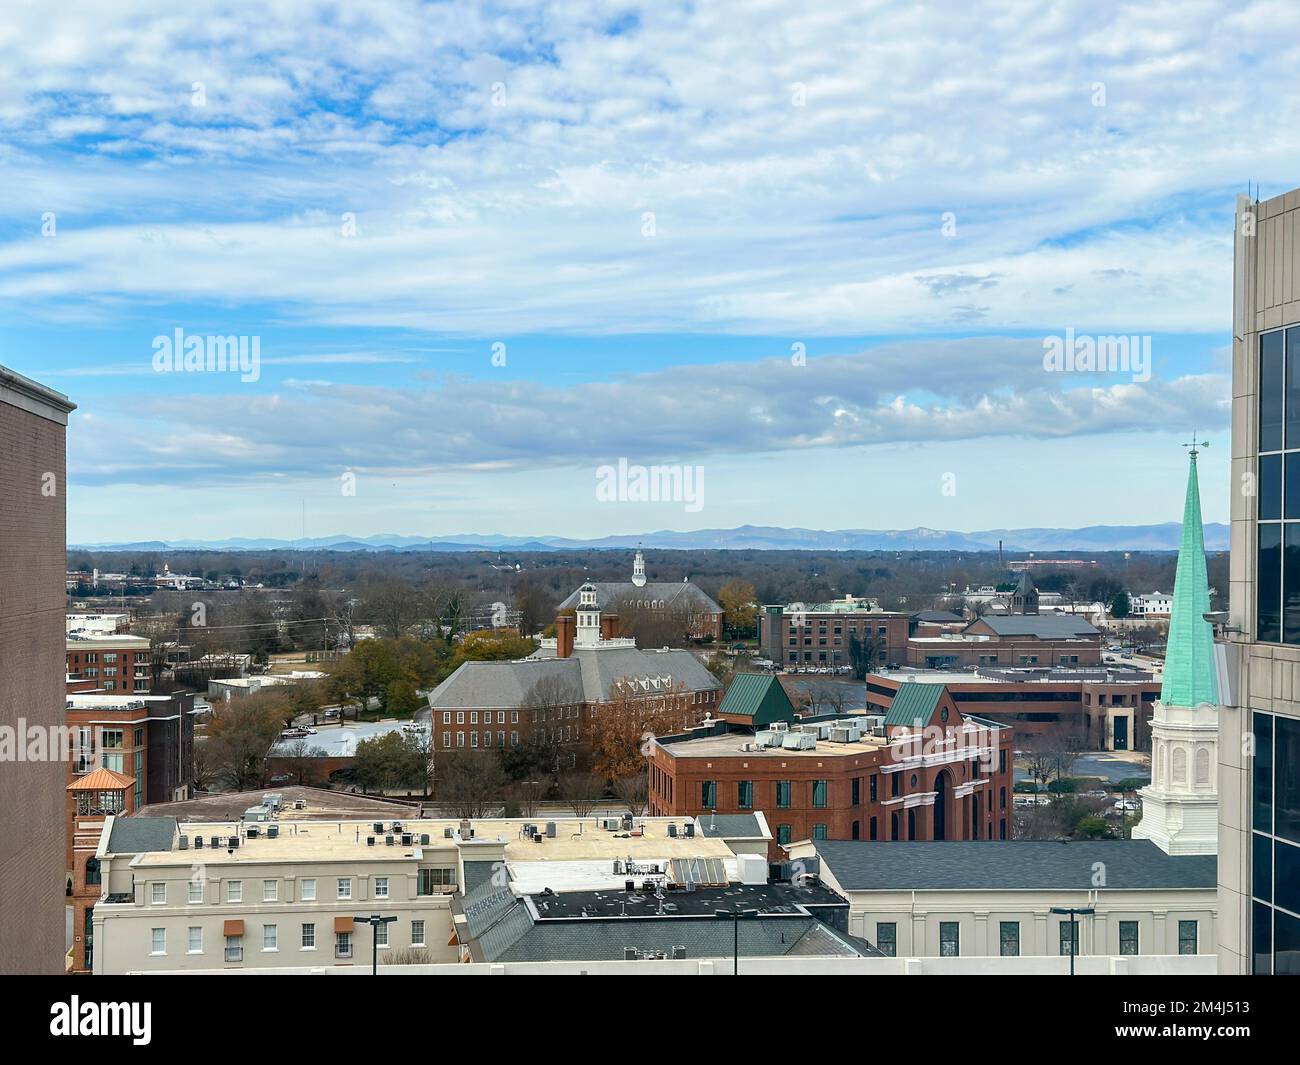 Looking over downtown Greenville, South Carolina from an upper floor with Blue Ridge Mountains in the distance. Stock Photo